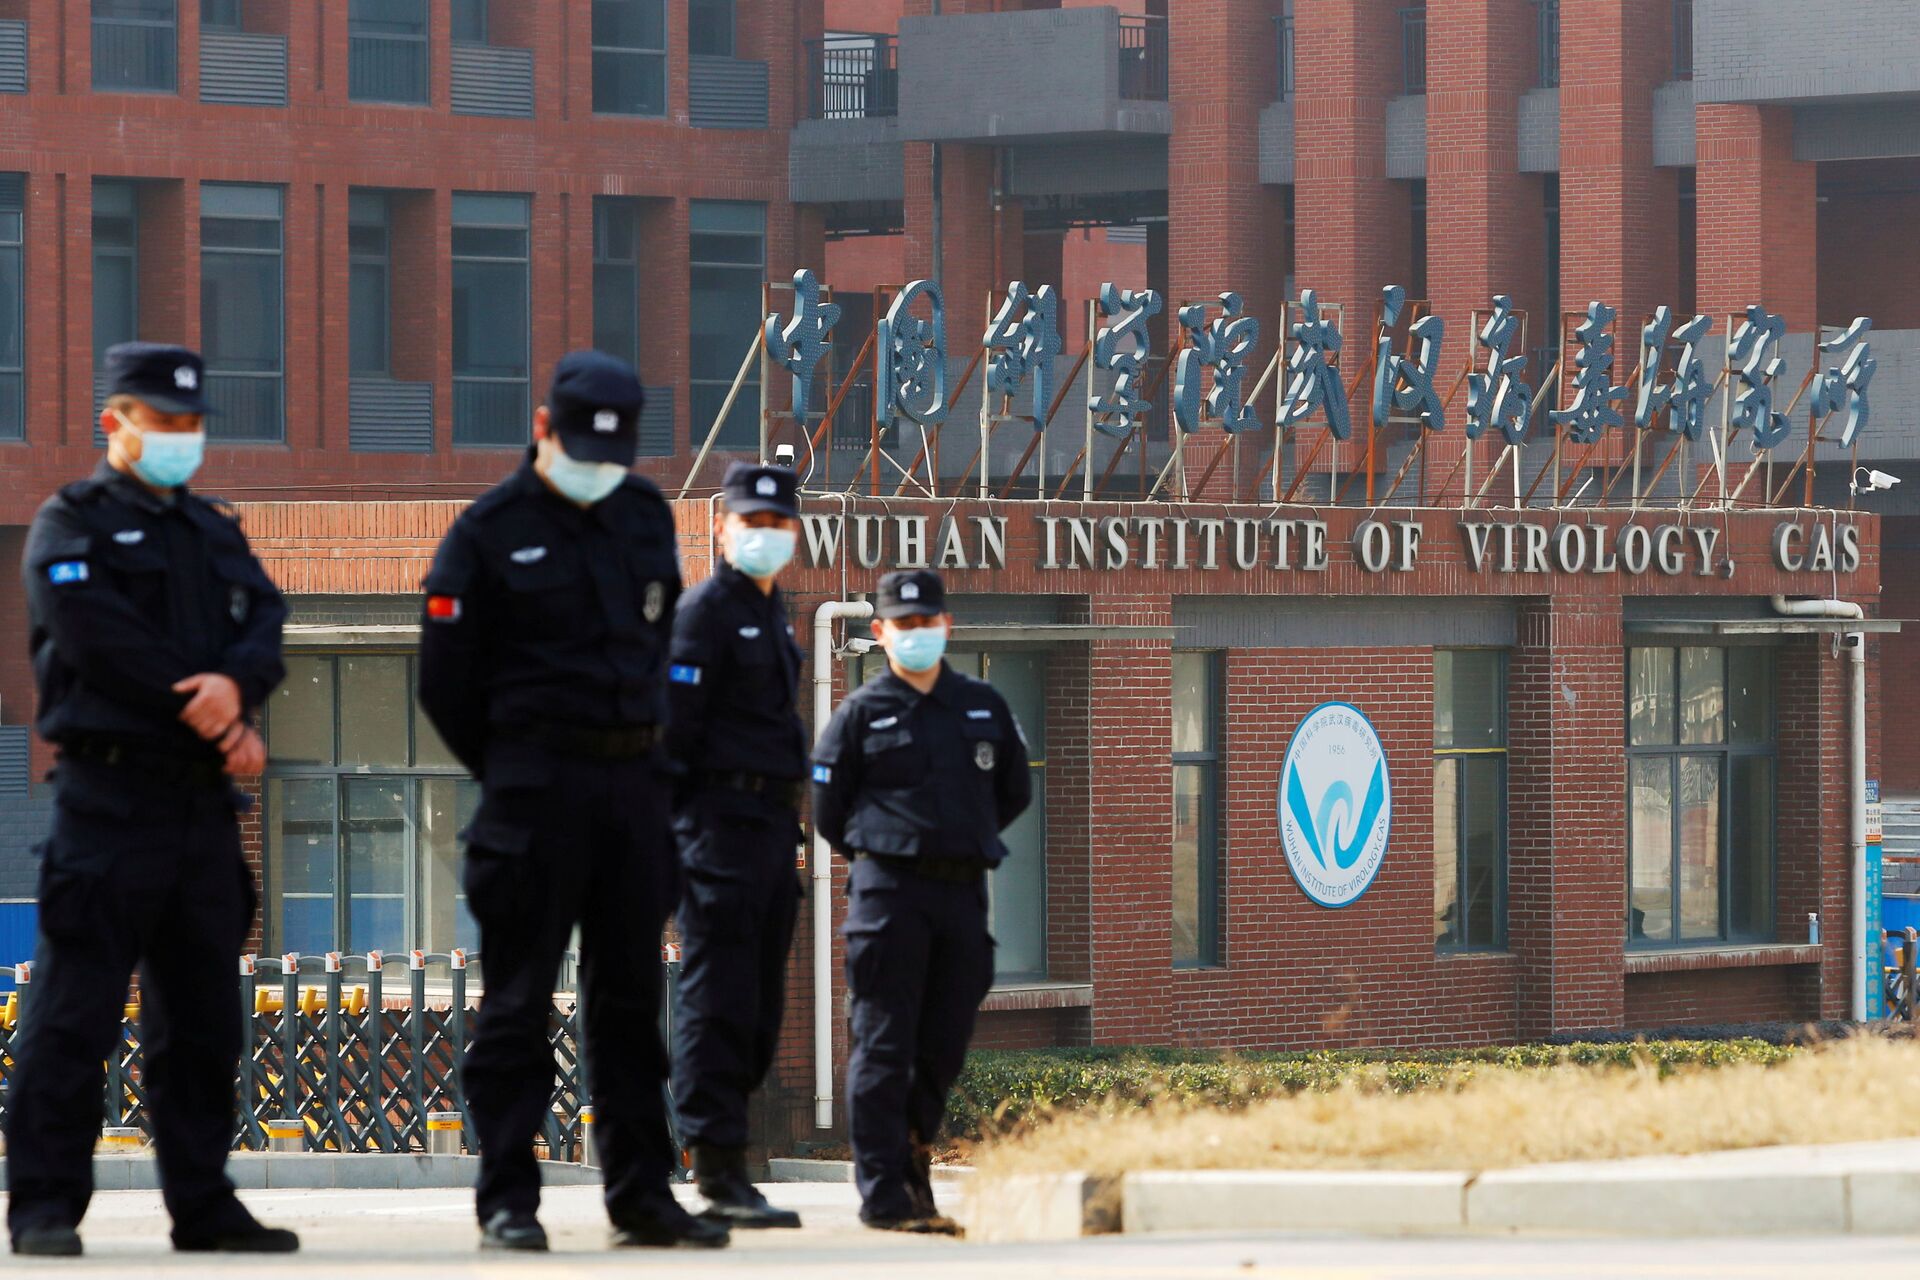 Security personnel keep watch outside the Wuhan Institute of Virology during a visit by the World Health Organisation (WHO) team tasked with investigating the origins of the coronavirus disease (COVID-19), in Wuhan, Hubei Province, China 3 February 2021. - Sputnik International, 1920, 19.11.2021